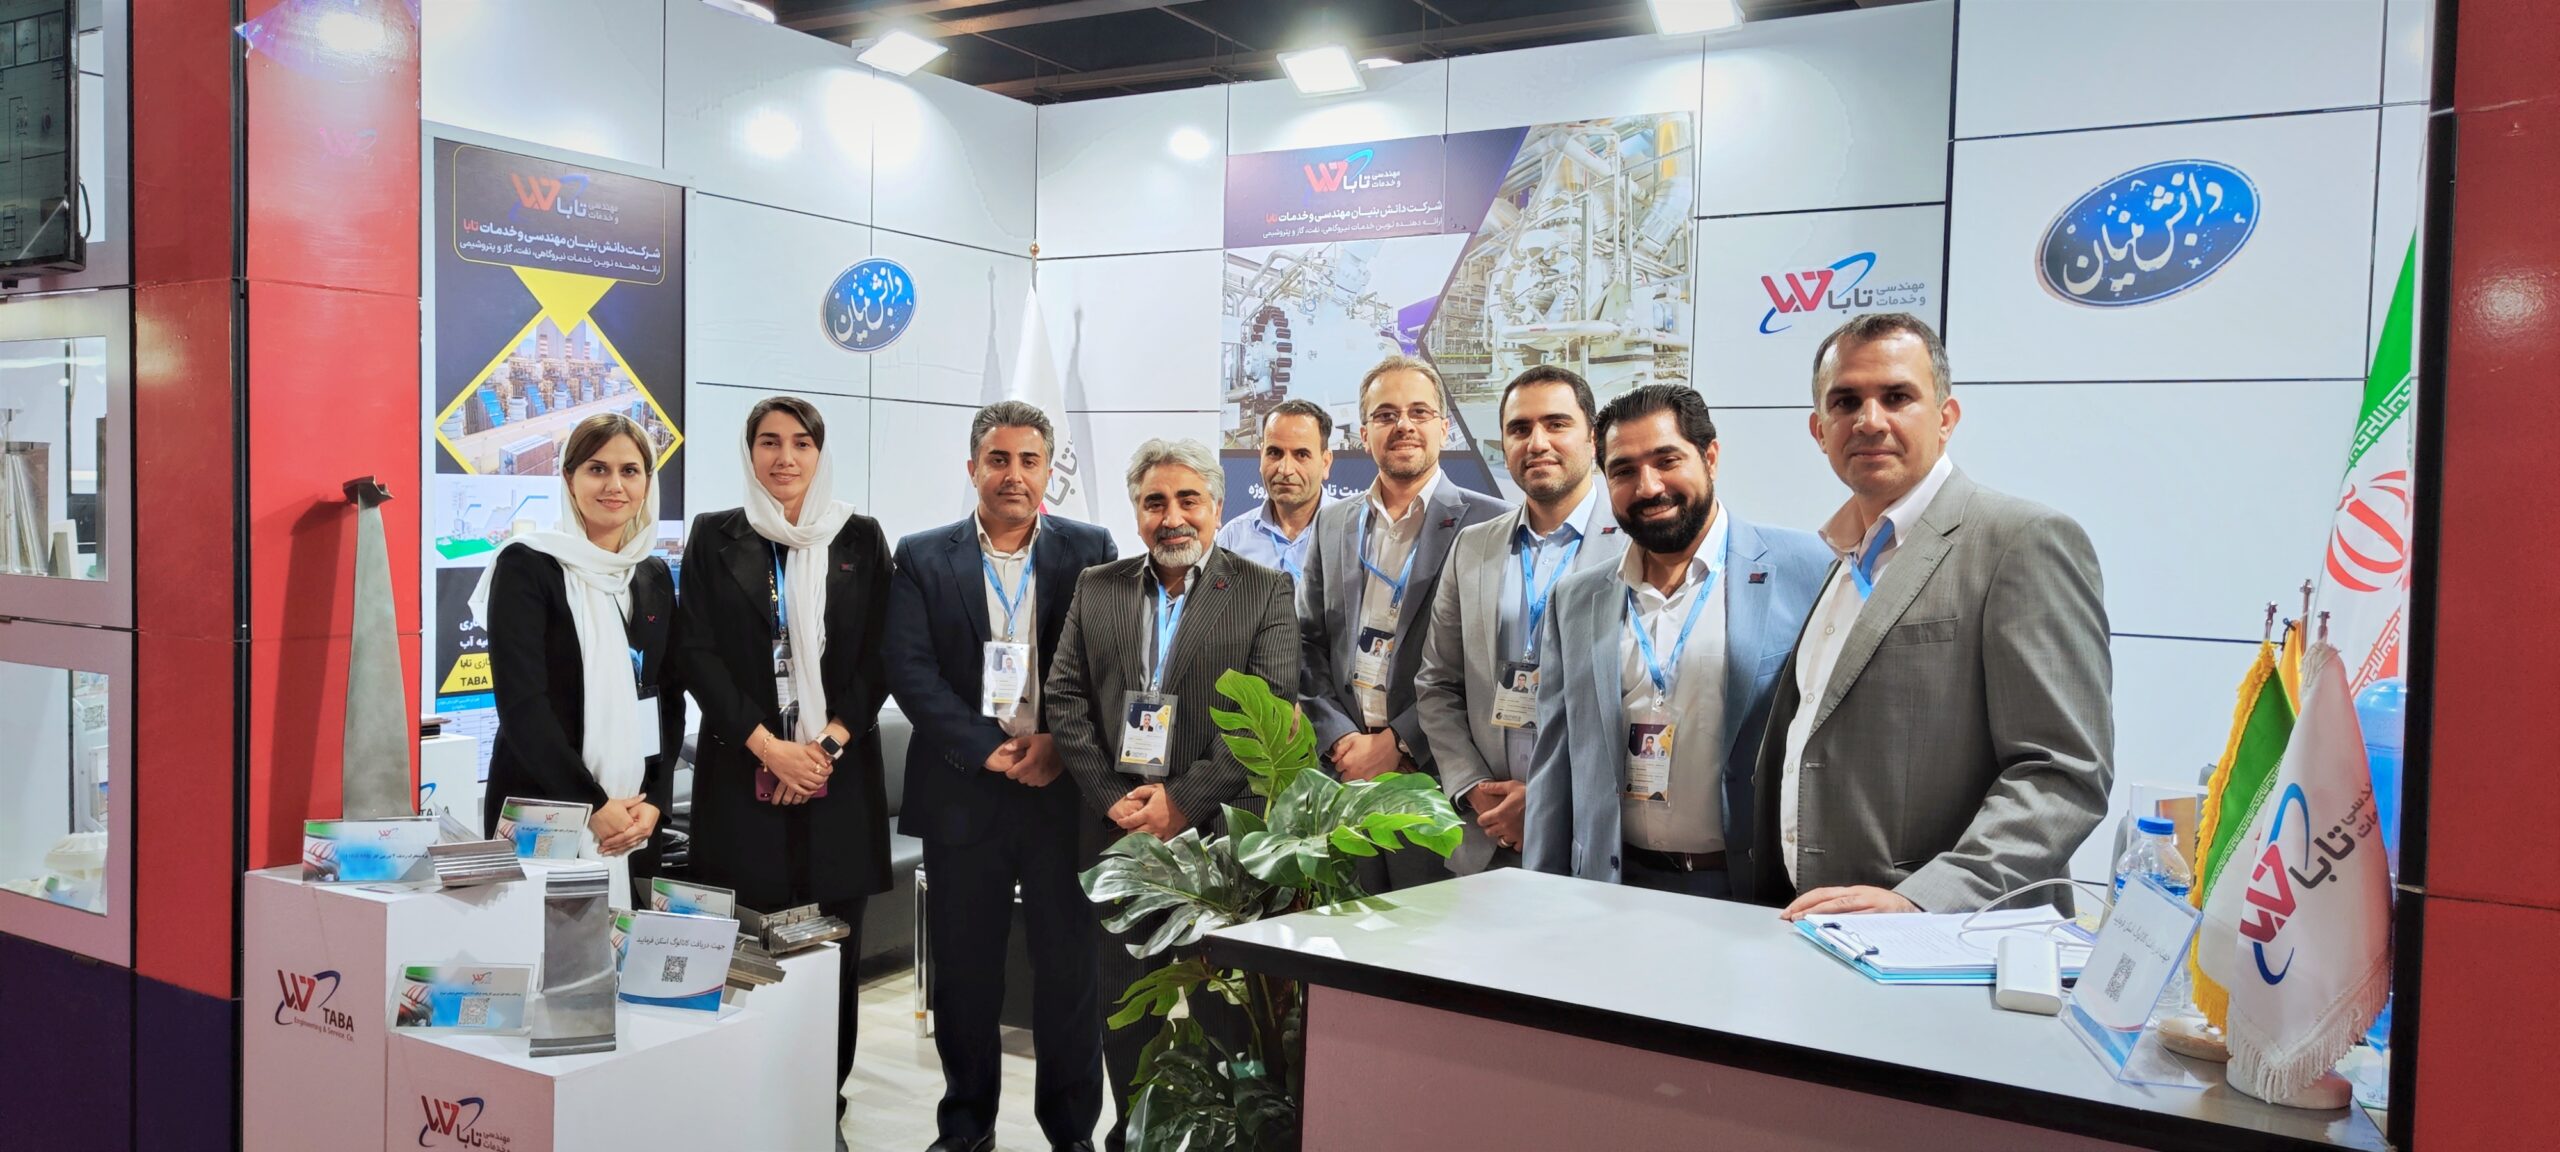 Visual report of the visits and meetings of the International Oil, Gas, Refining and Petrochemical Exhibition